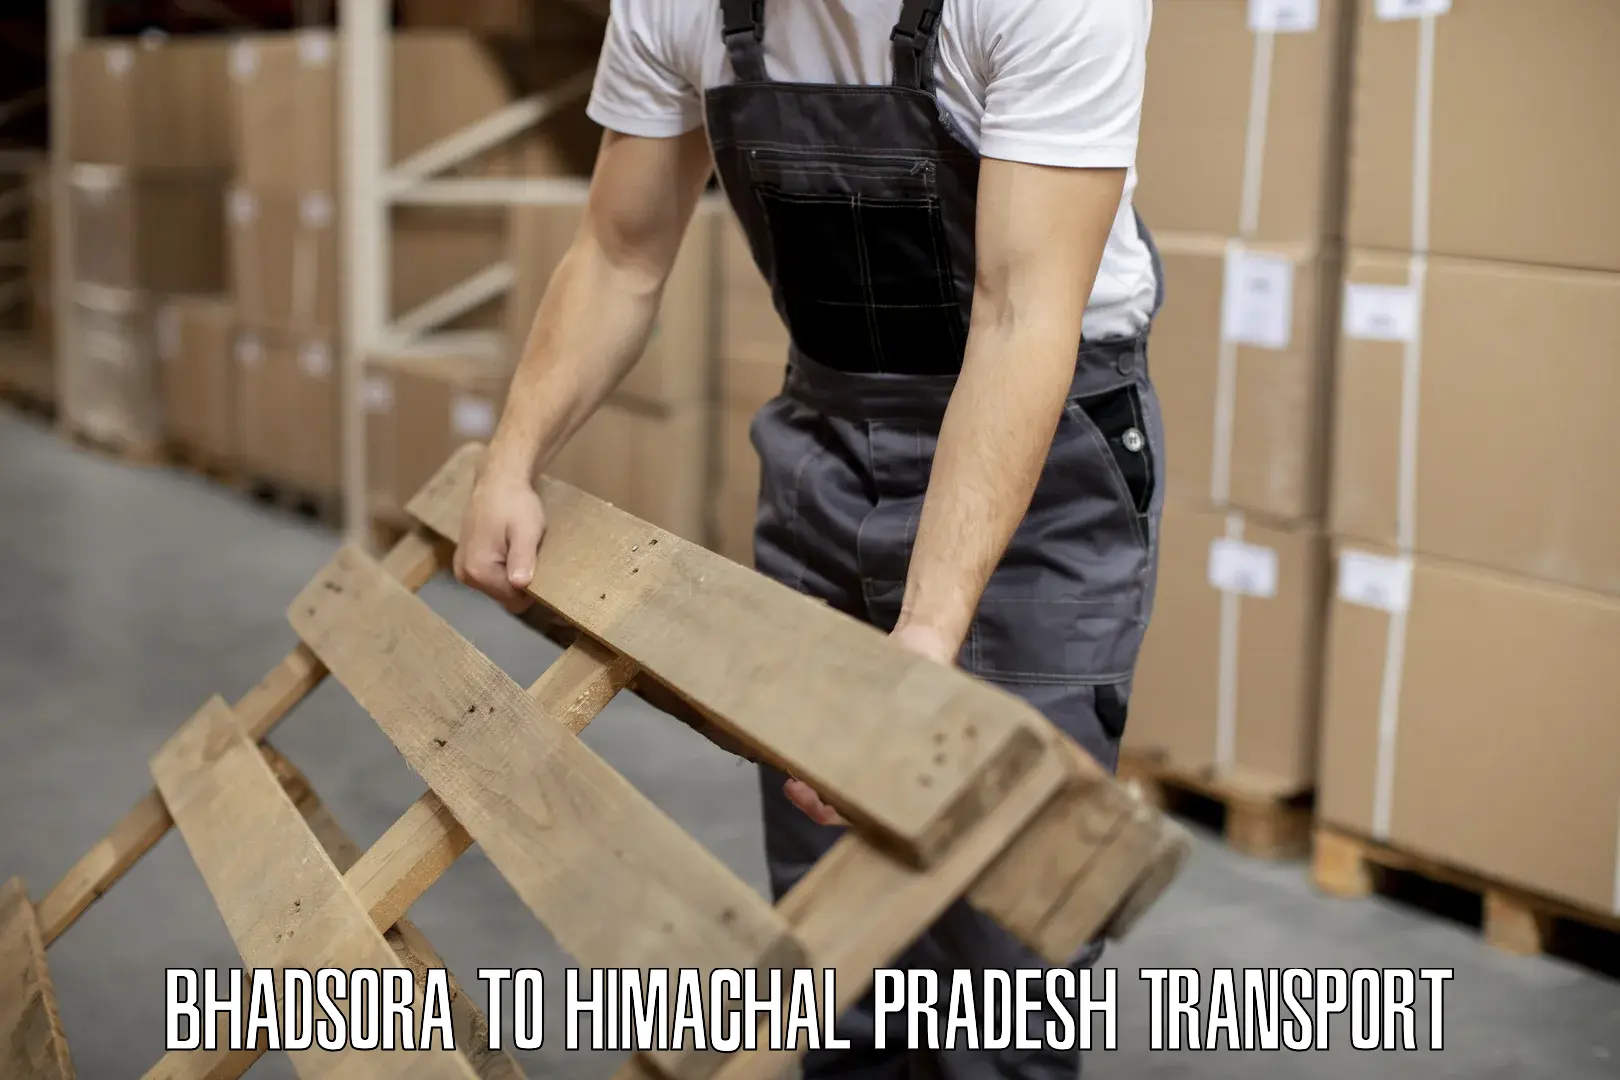 Air freight transport services Bhadsora to Himachal Pradesh